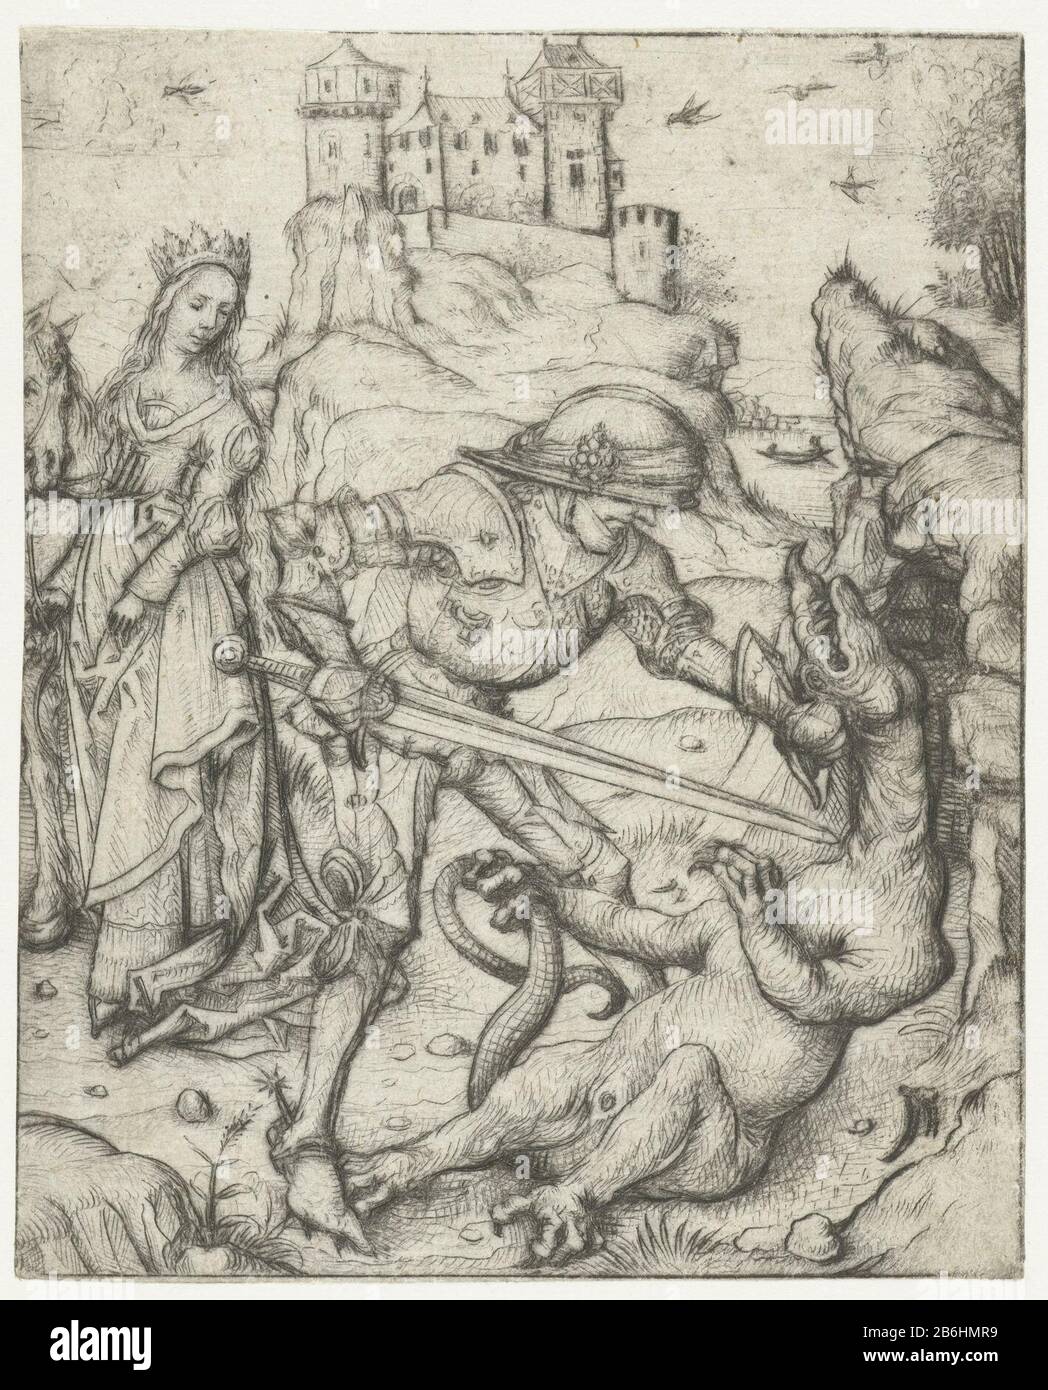 The H Joris foot George, on foot, kills the dragon with his heavy d. Princess Cleodelinde watches and keeps his horse vast. Manufacturer : printmaker Master of the Amsterdam Cabinet to draft Master of the Amsterdam Cabinet Place manufacture: Germany Date: 1488 - 1492 Physical features: drypoint material: paper Technique: drypoint Dimensions: sheet: H 141 mm b × 114 mmToelichtingGoede pressure. Two specimens preserved, others in Bibliothèque Nationale, Parijs. Subject: non-miraculous activities and events  St. George Stock Photo